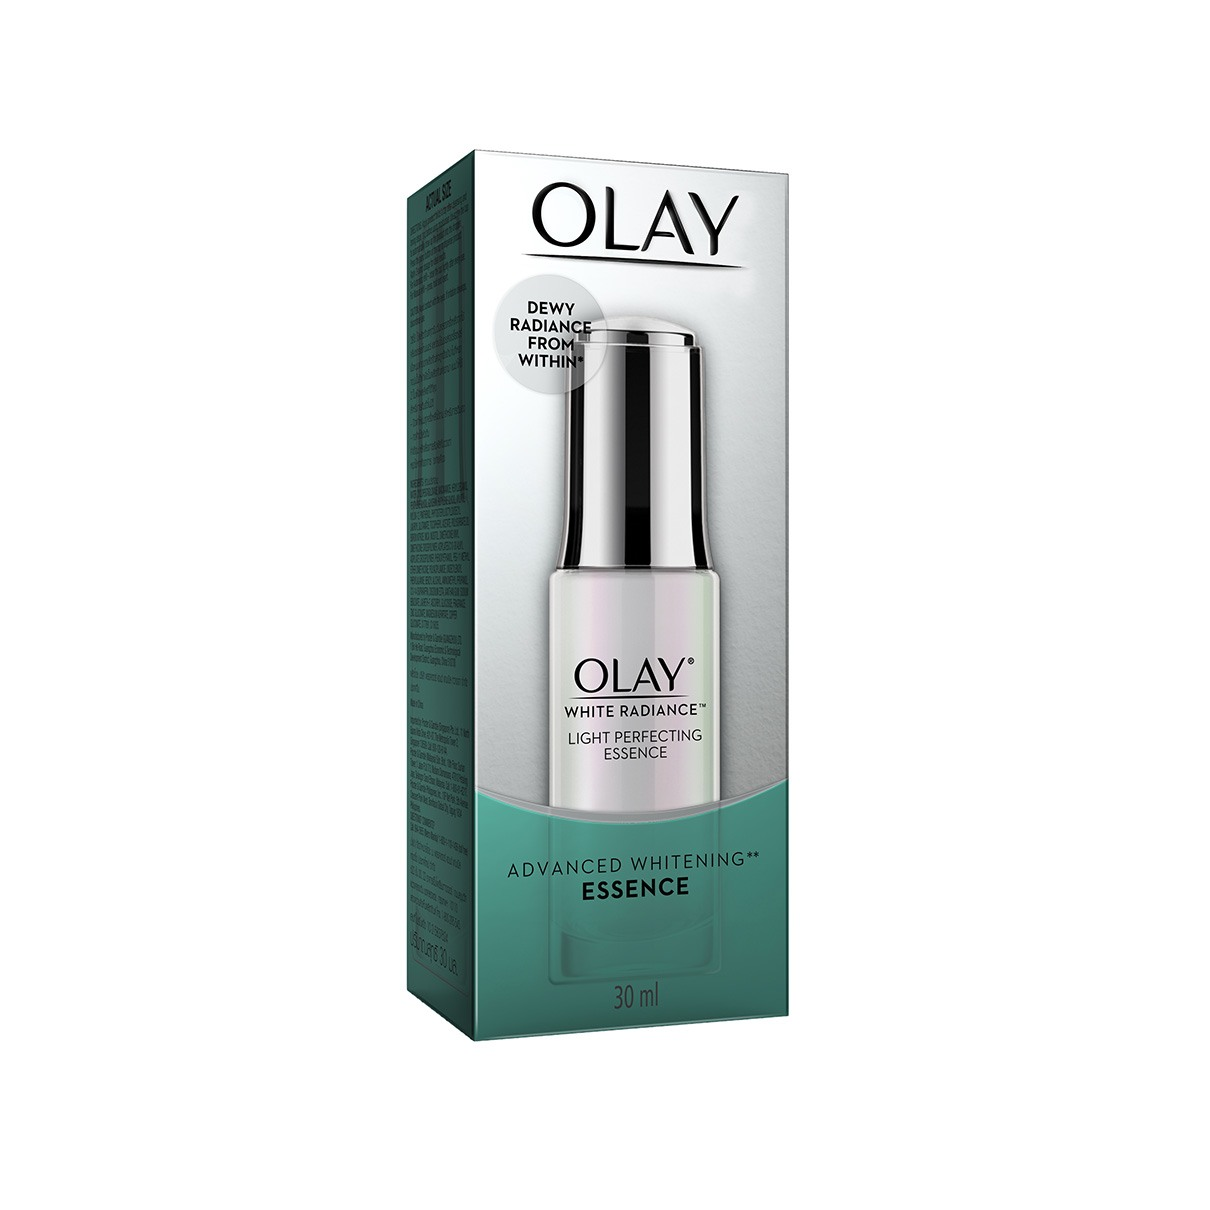 PDP PH - SI3- Olay White Radiance Light Perfecting Essence